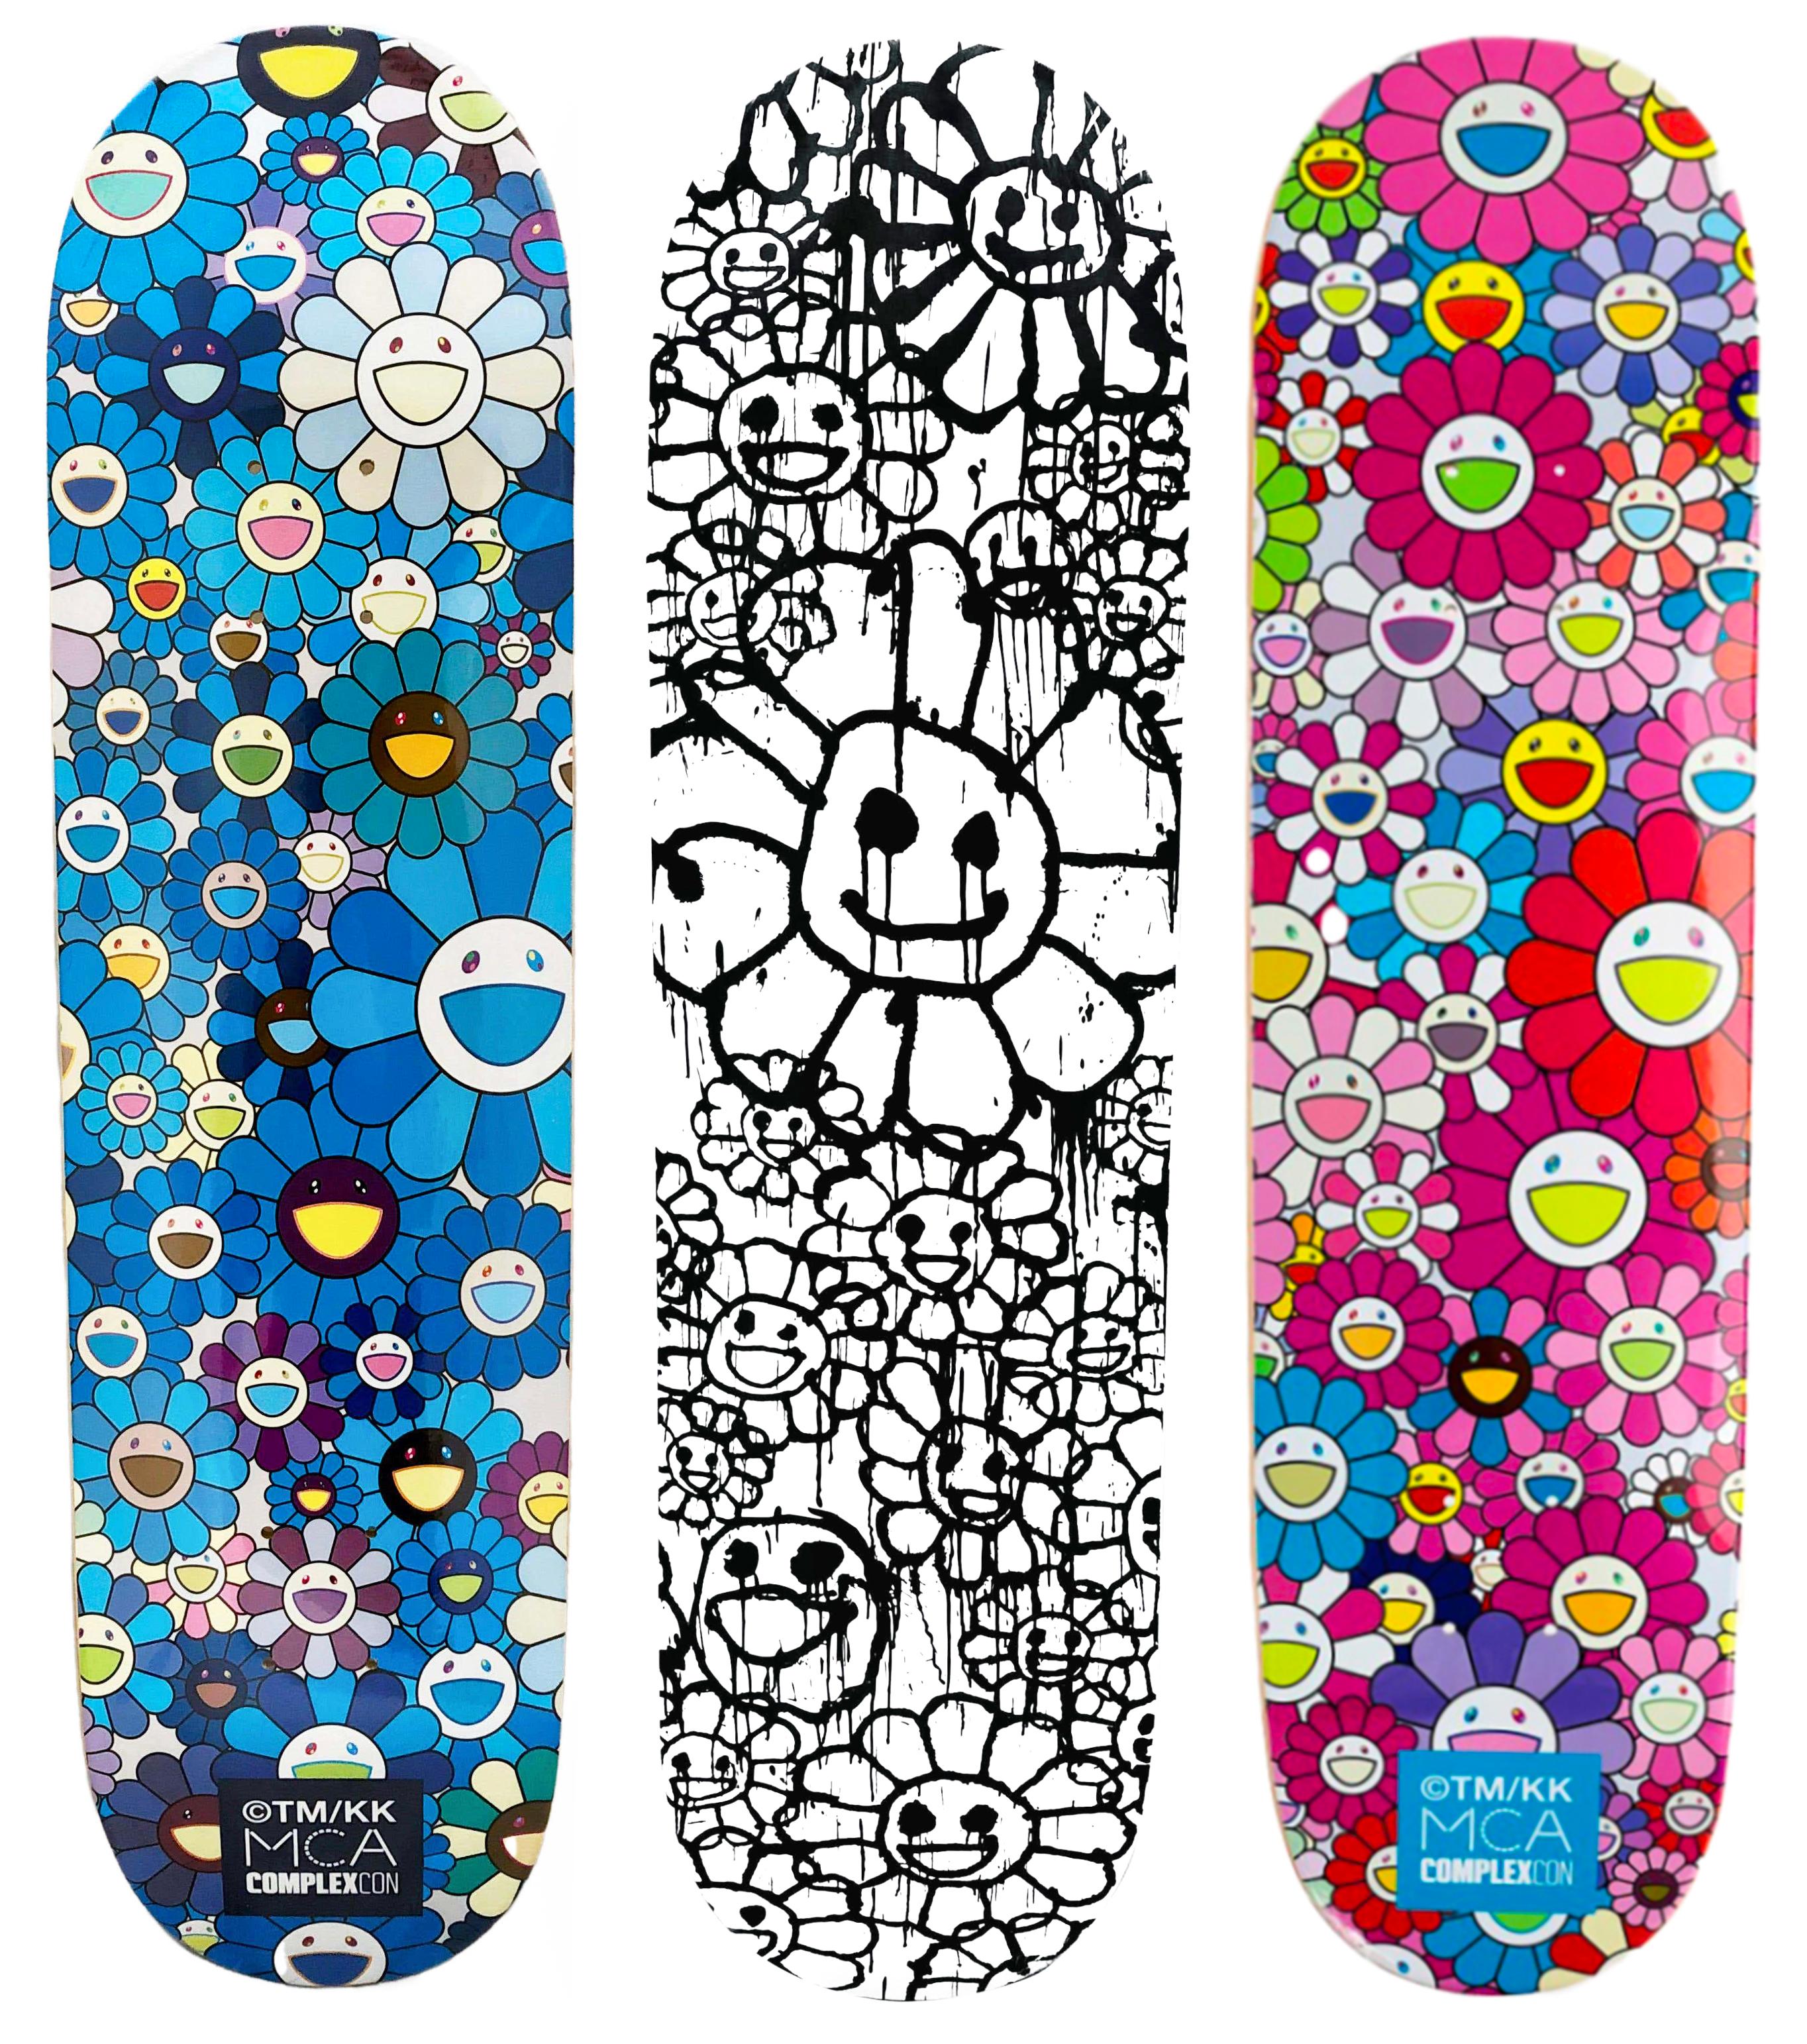 Takashi Murakami Flowers Skateboard Decks: set of 3 works:
Vibrant Takashi Murakami wall art produced as a limited series in conjunction with the 2017 Murakami exhibit: The Octopus Eats Its Own Leg, MCA Chicago (blue & pink) & 2021 (black & white